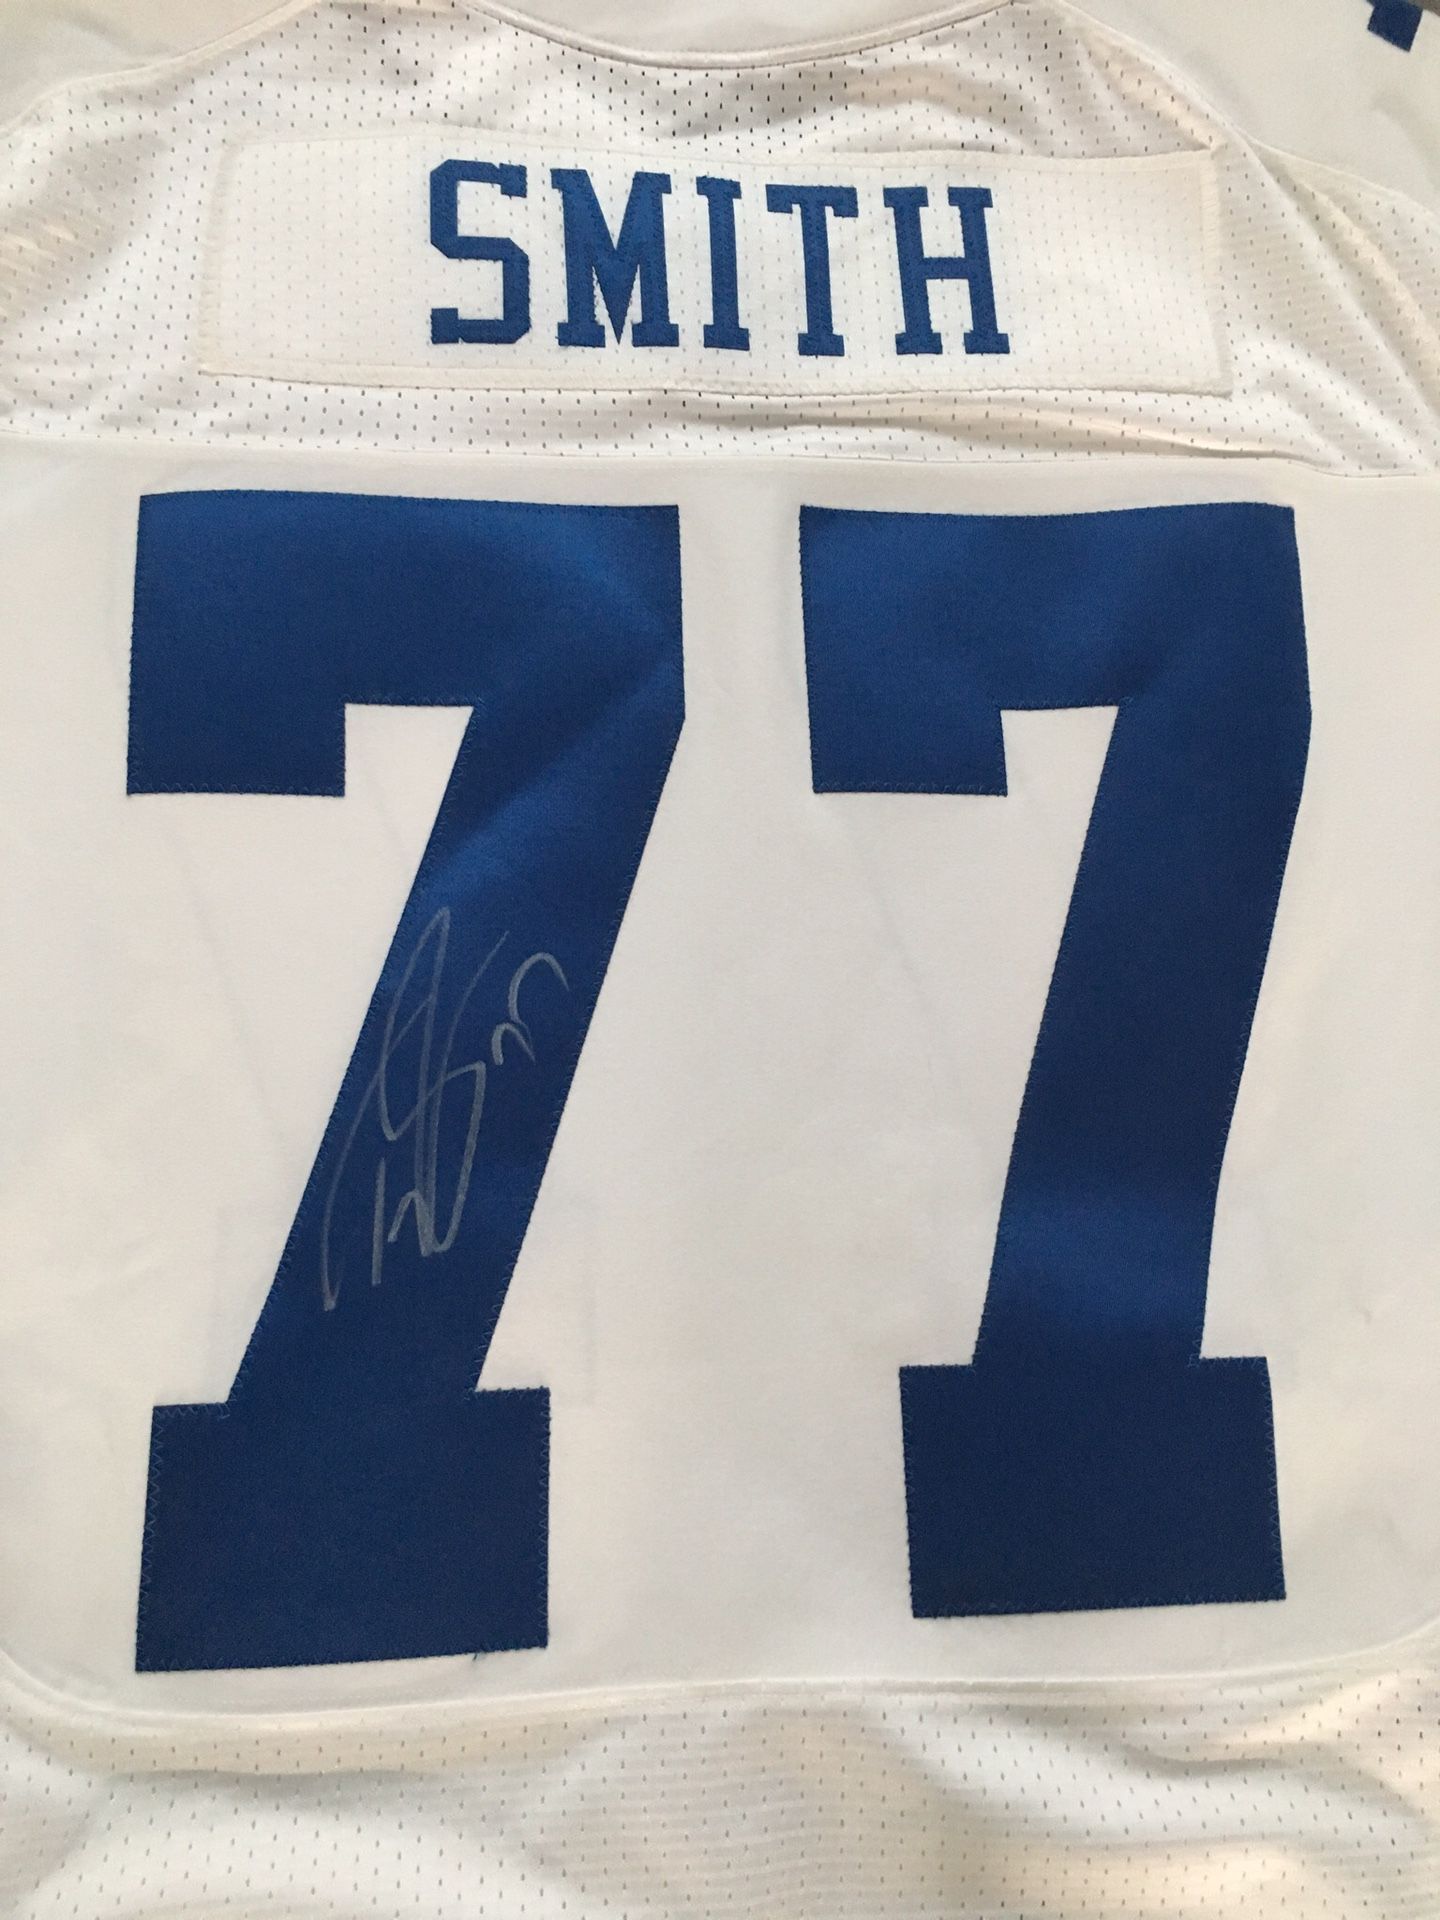 Tyron Smith autographed jersey